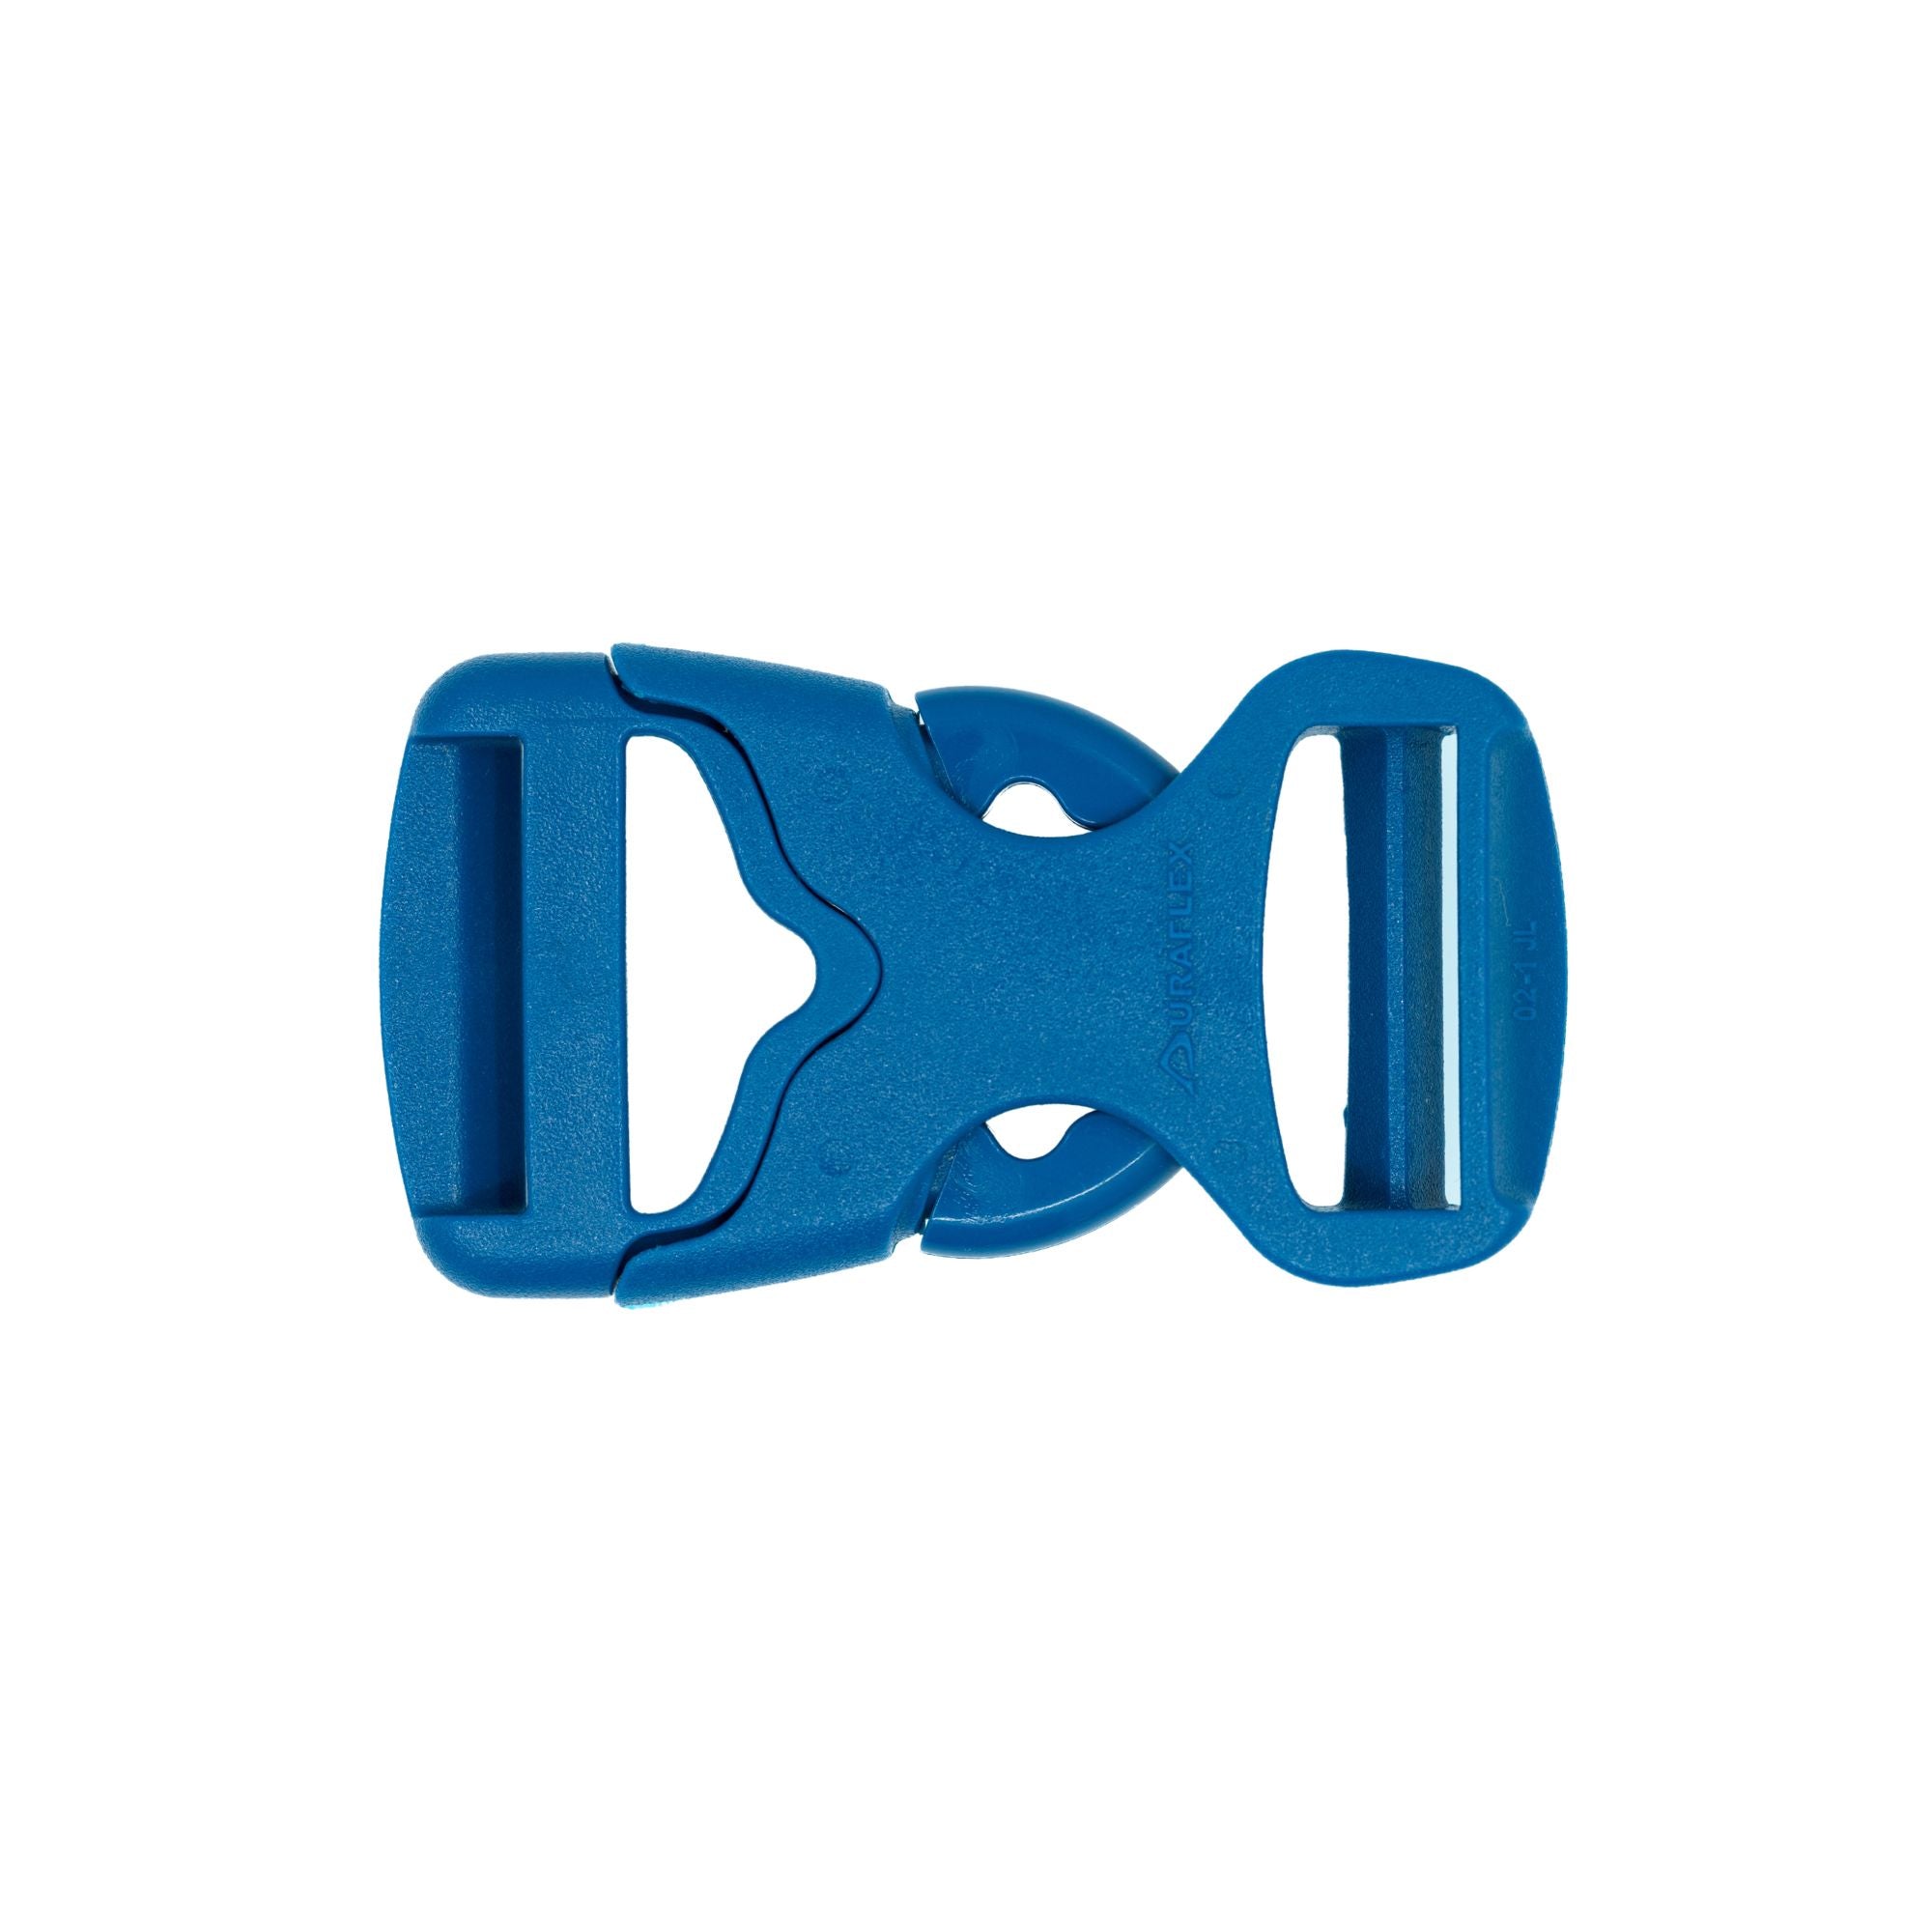 Dual Adjust Side-Release Buckle  Duraflex® - Ripstop by the Roll